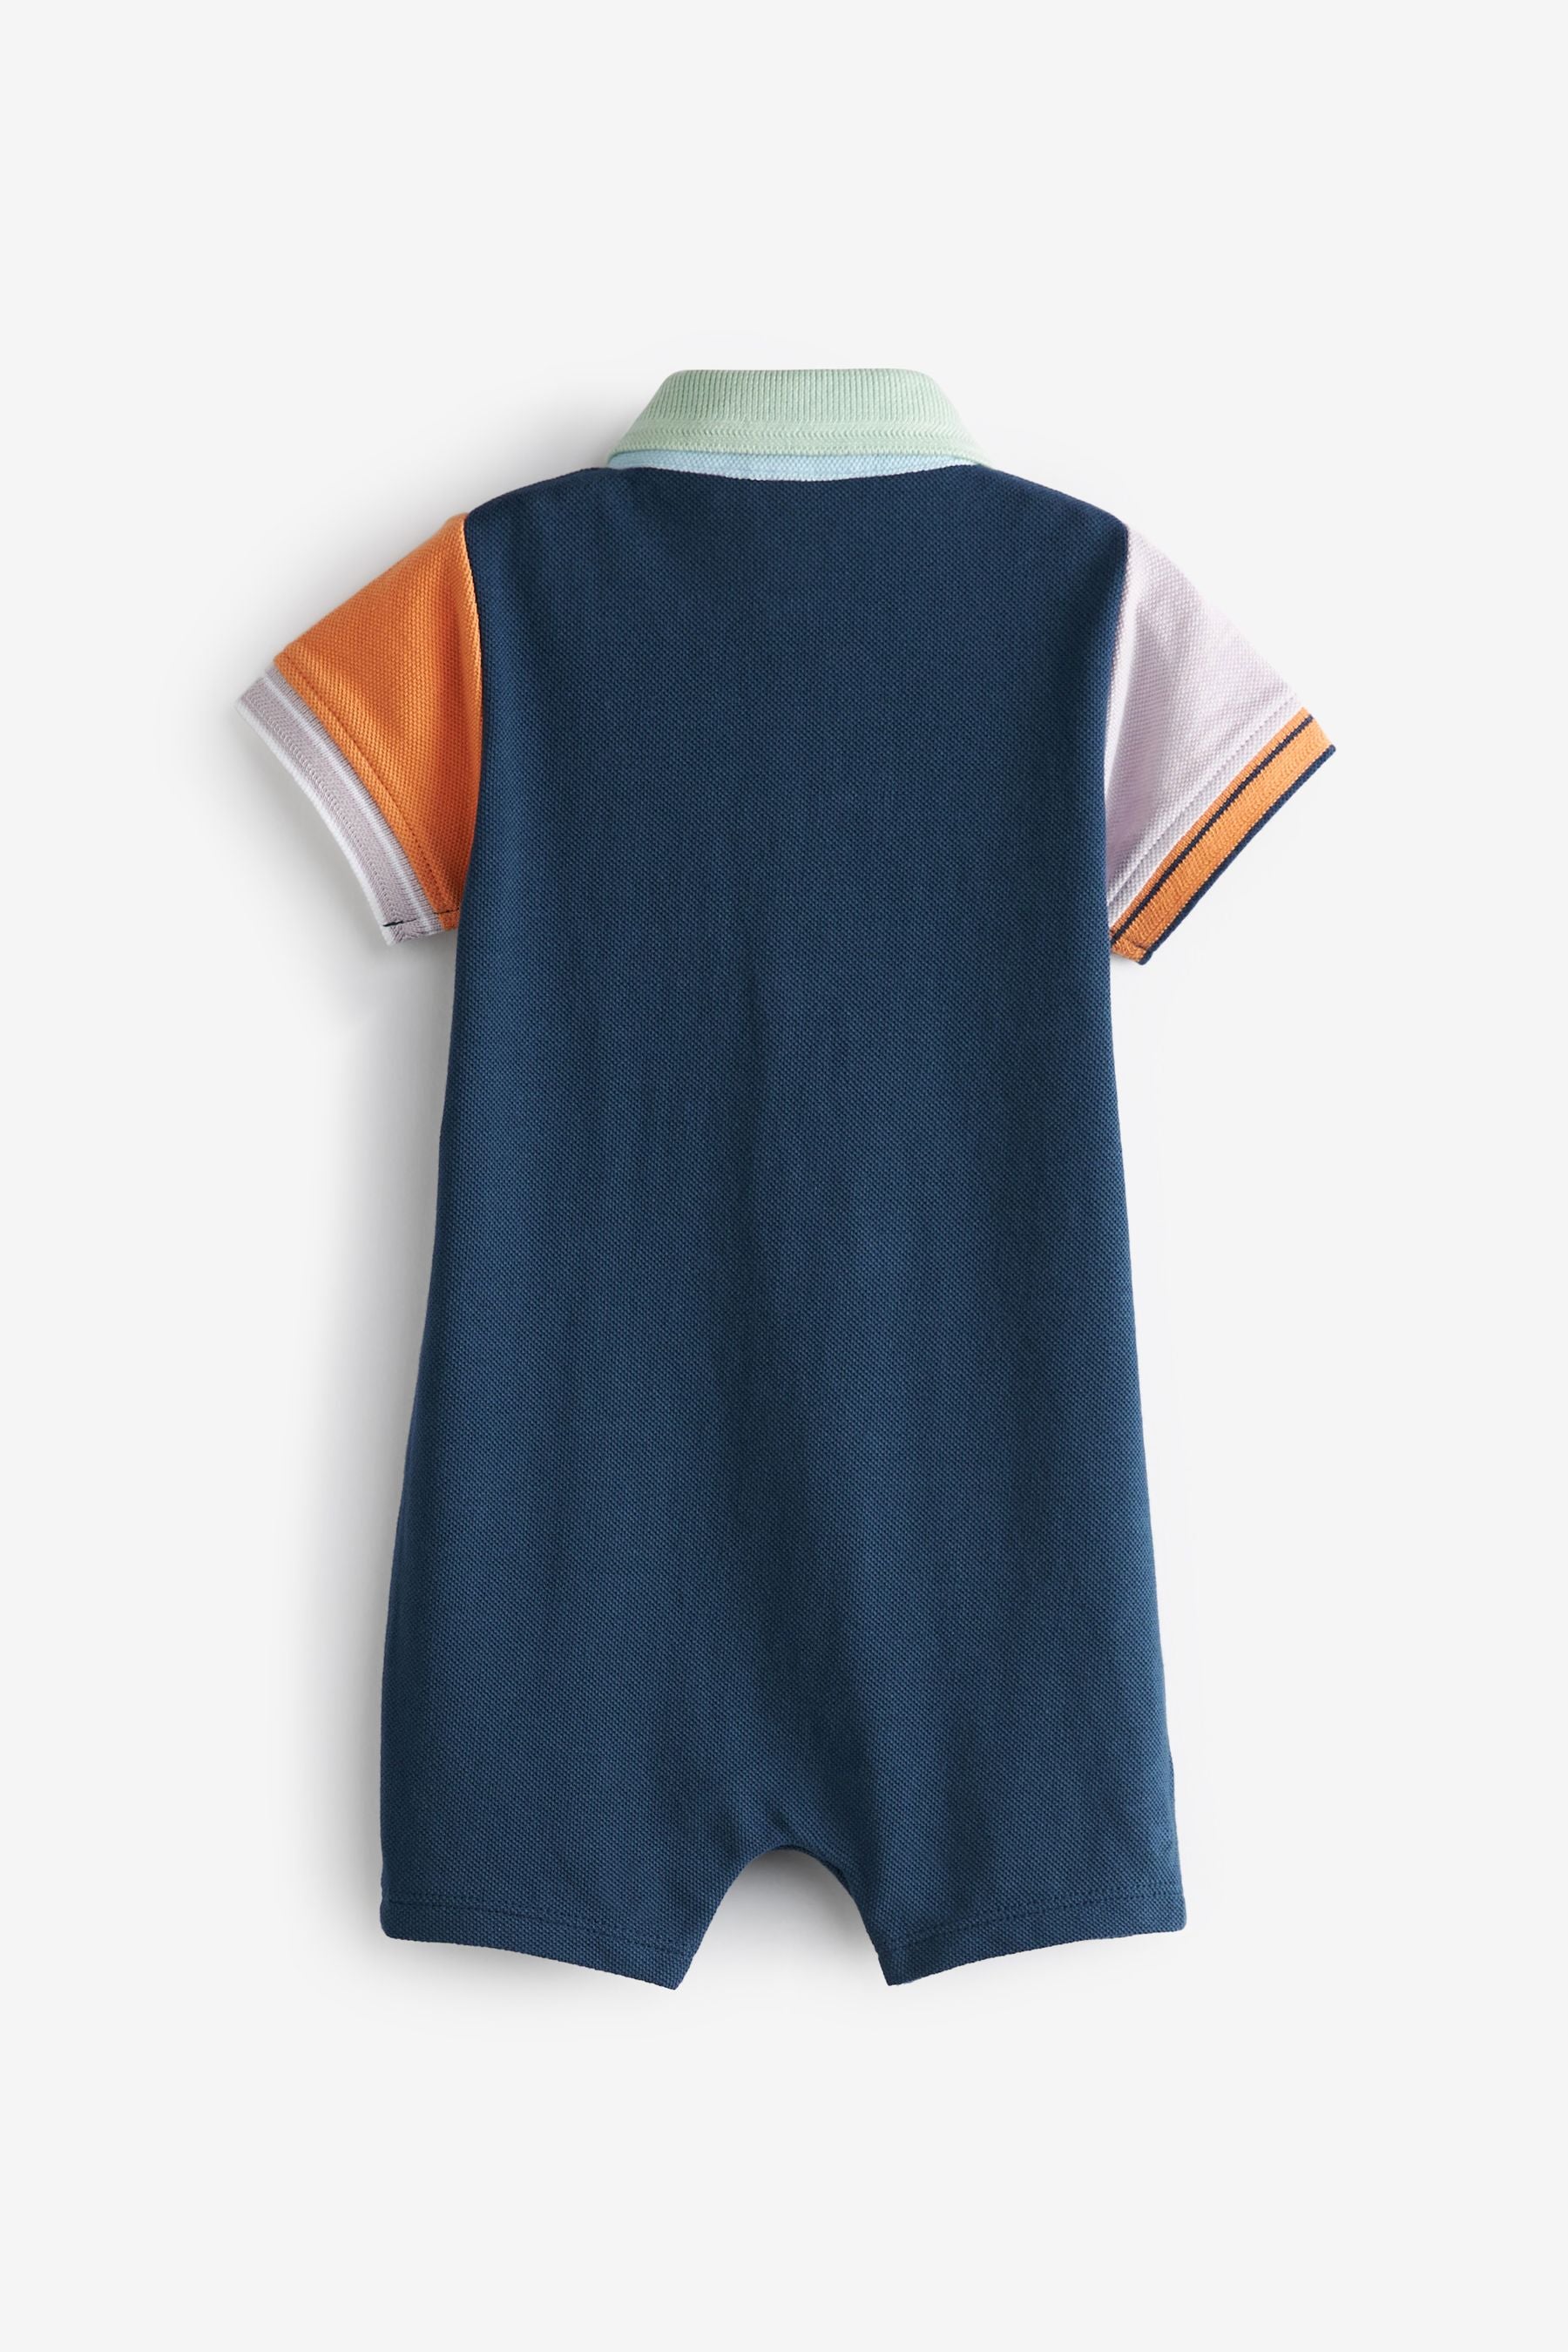 Navy Blue Colourblock Baby 2 Pack Rompers (0mths-3yrs)